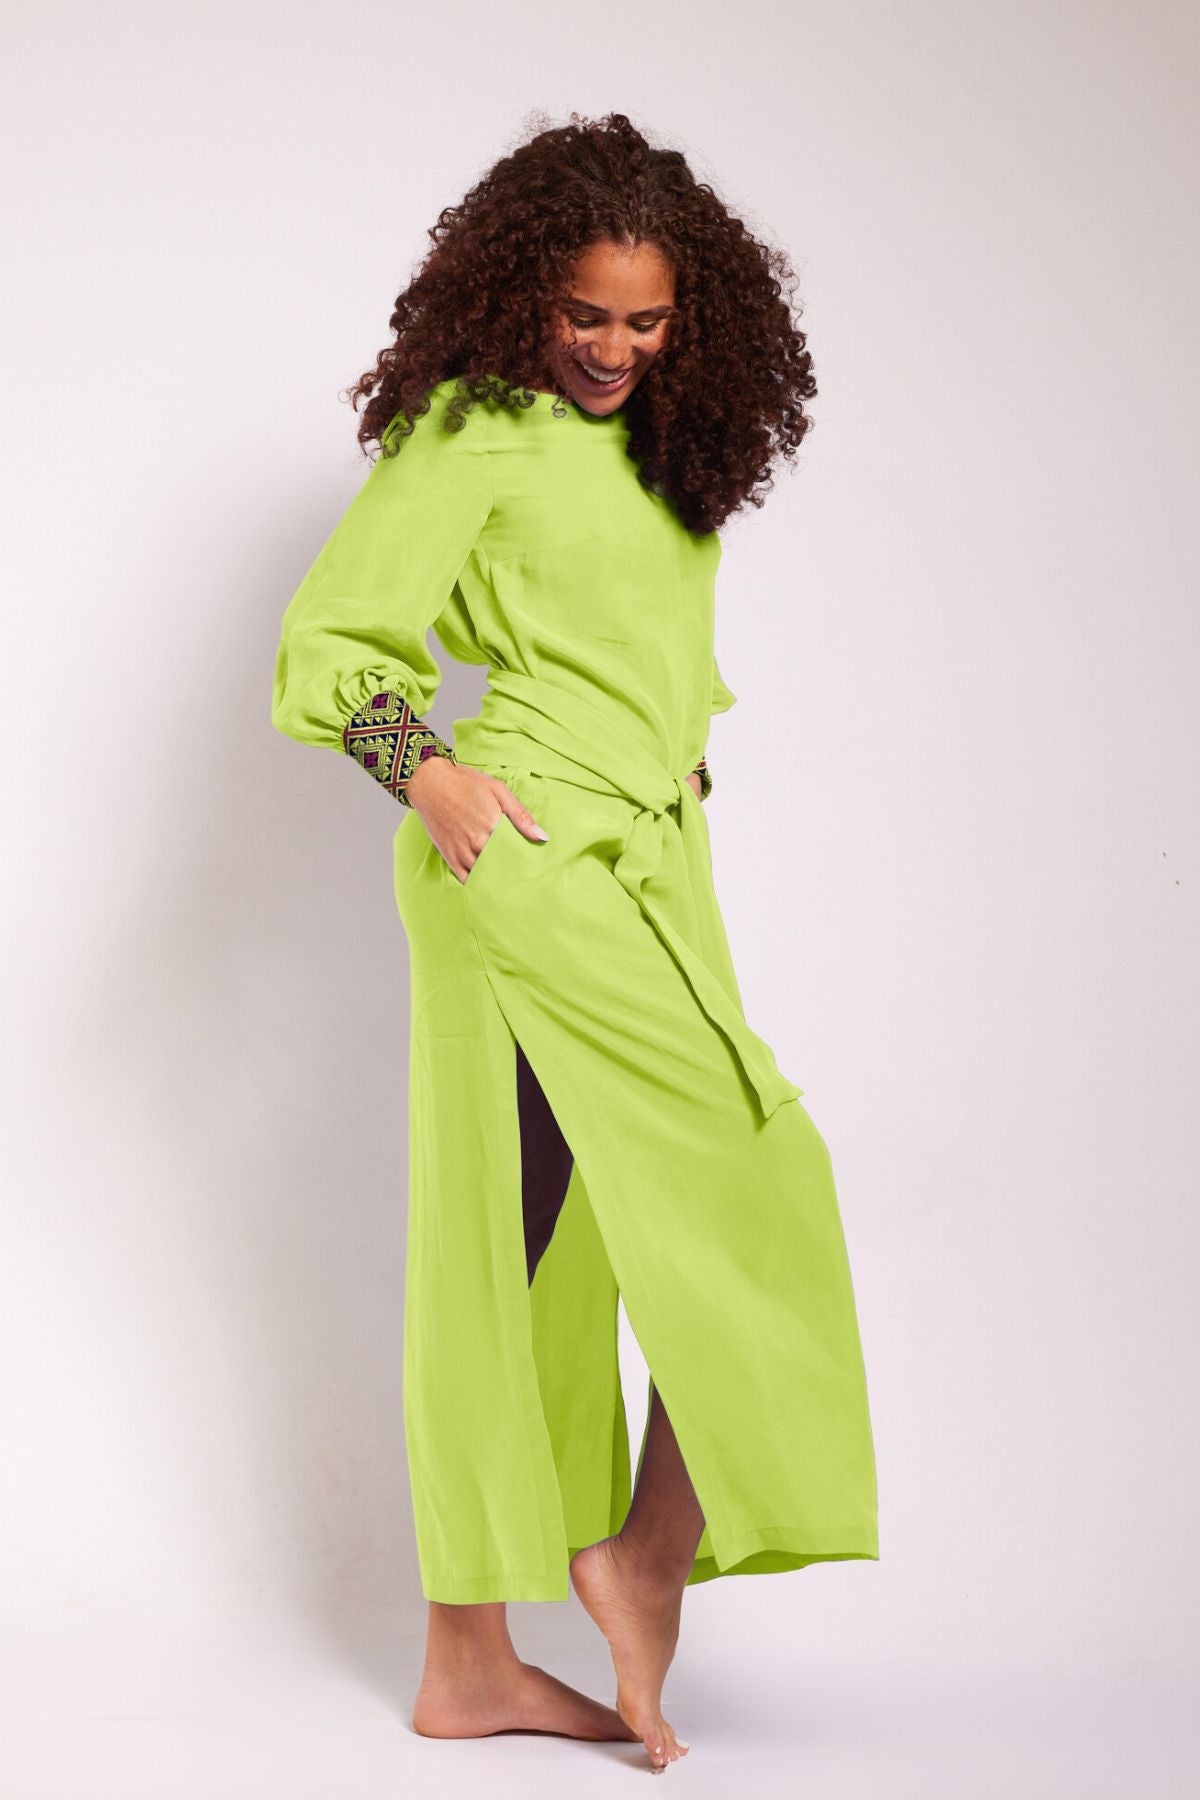 side view of woman modelling a bright yellow kaftan duster with embroidered sleeves made from recycled materials 2